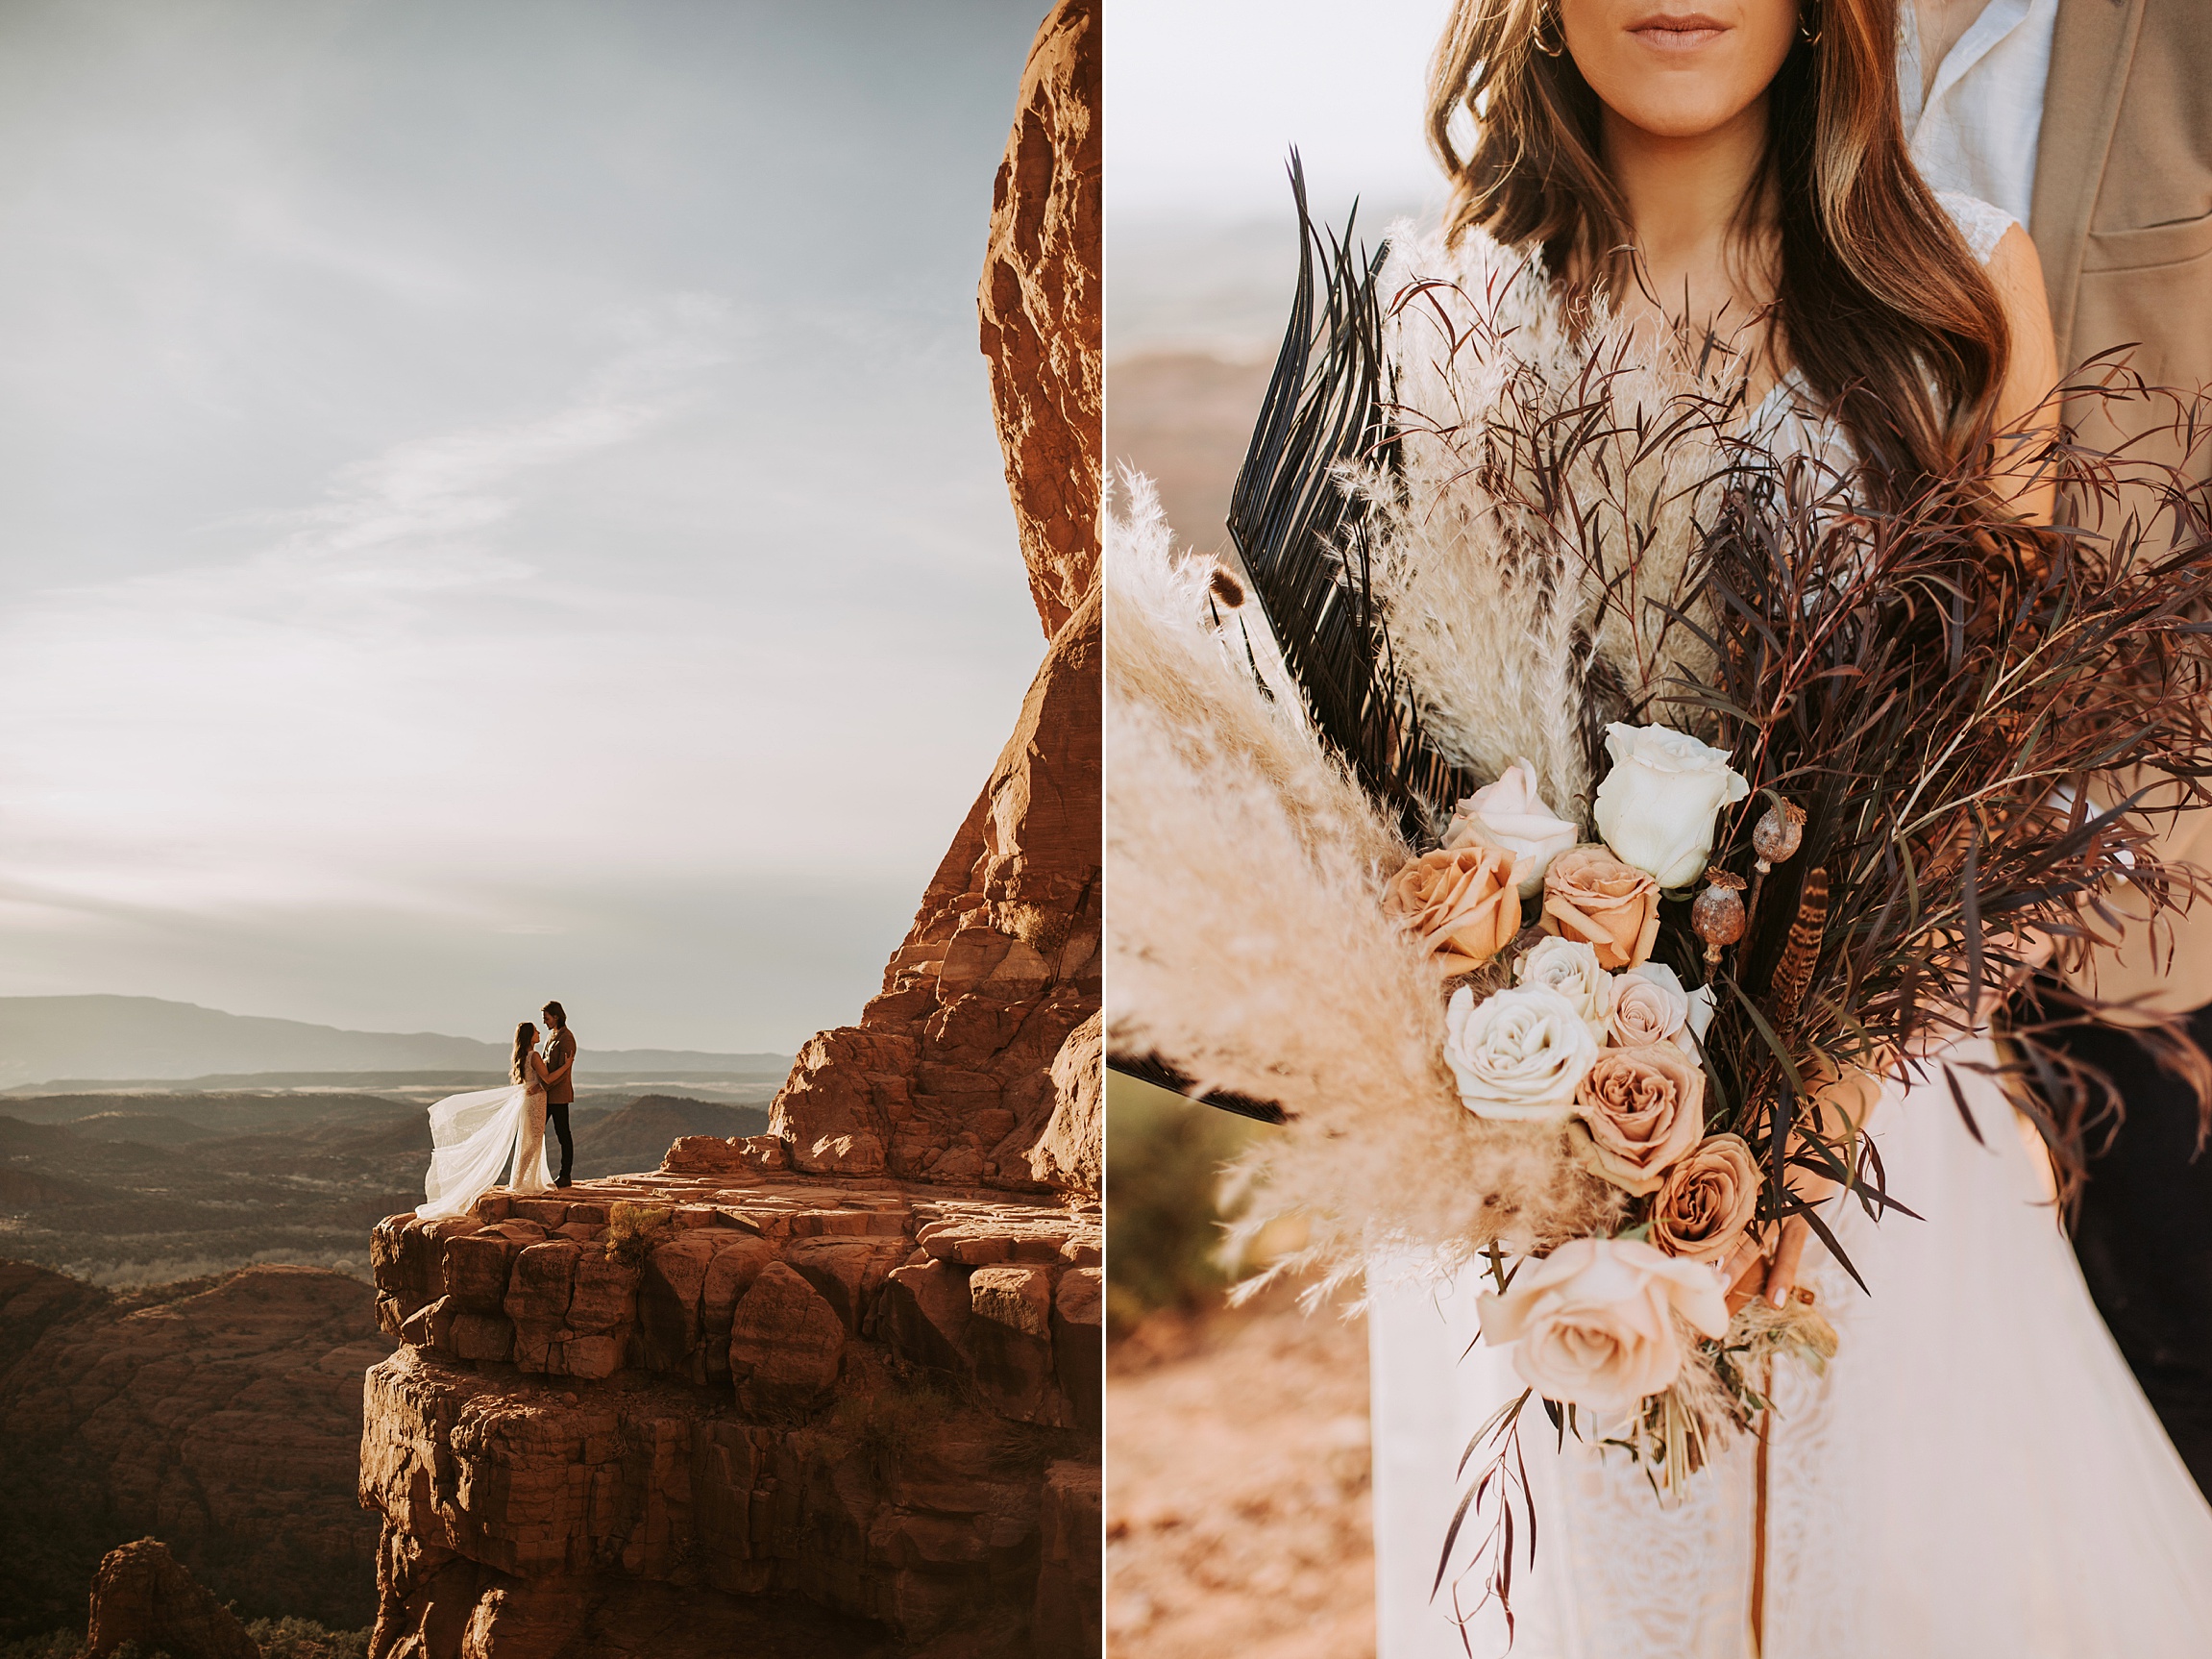 Engagement in Sedona AZ, Elopement in Sedona, Bride and Groom, Harley Davidson Motorcycle, Le Laurier Bridal, Adventurous Elopement, Arizona Wedding Photographer, Engaged, Cathedral Rock Elopement, Adventurous elopement, bohemian bride, bride bouquet